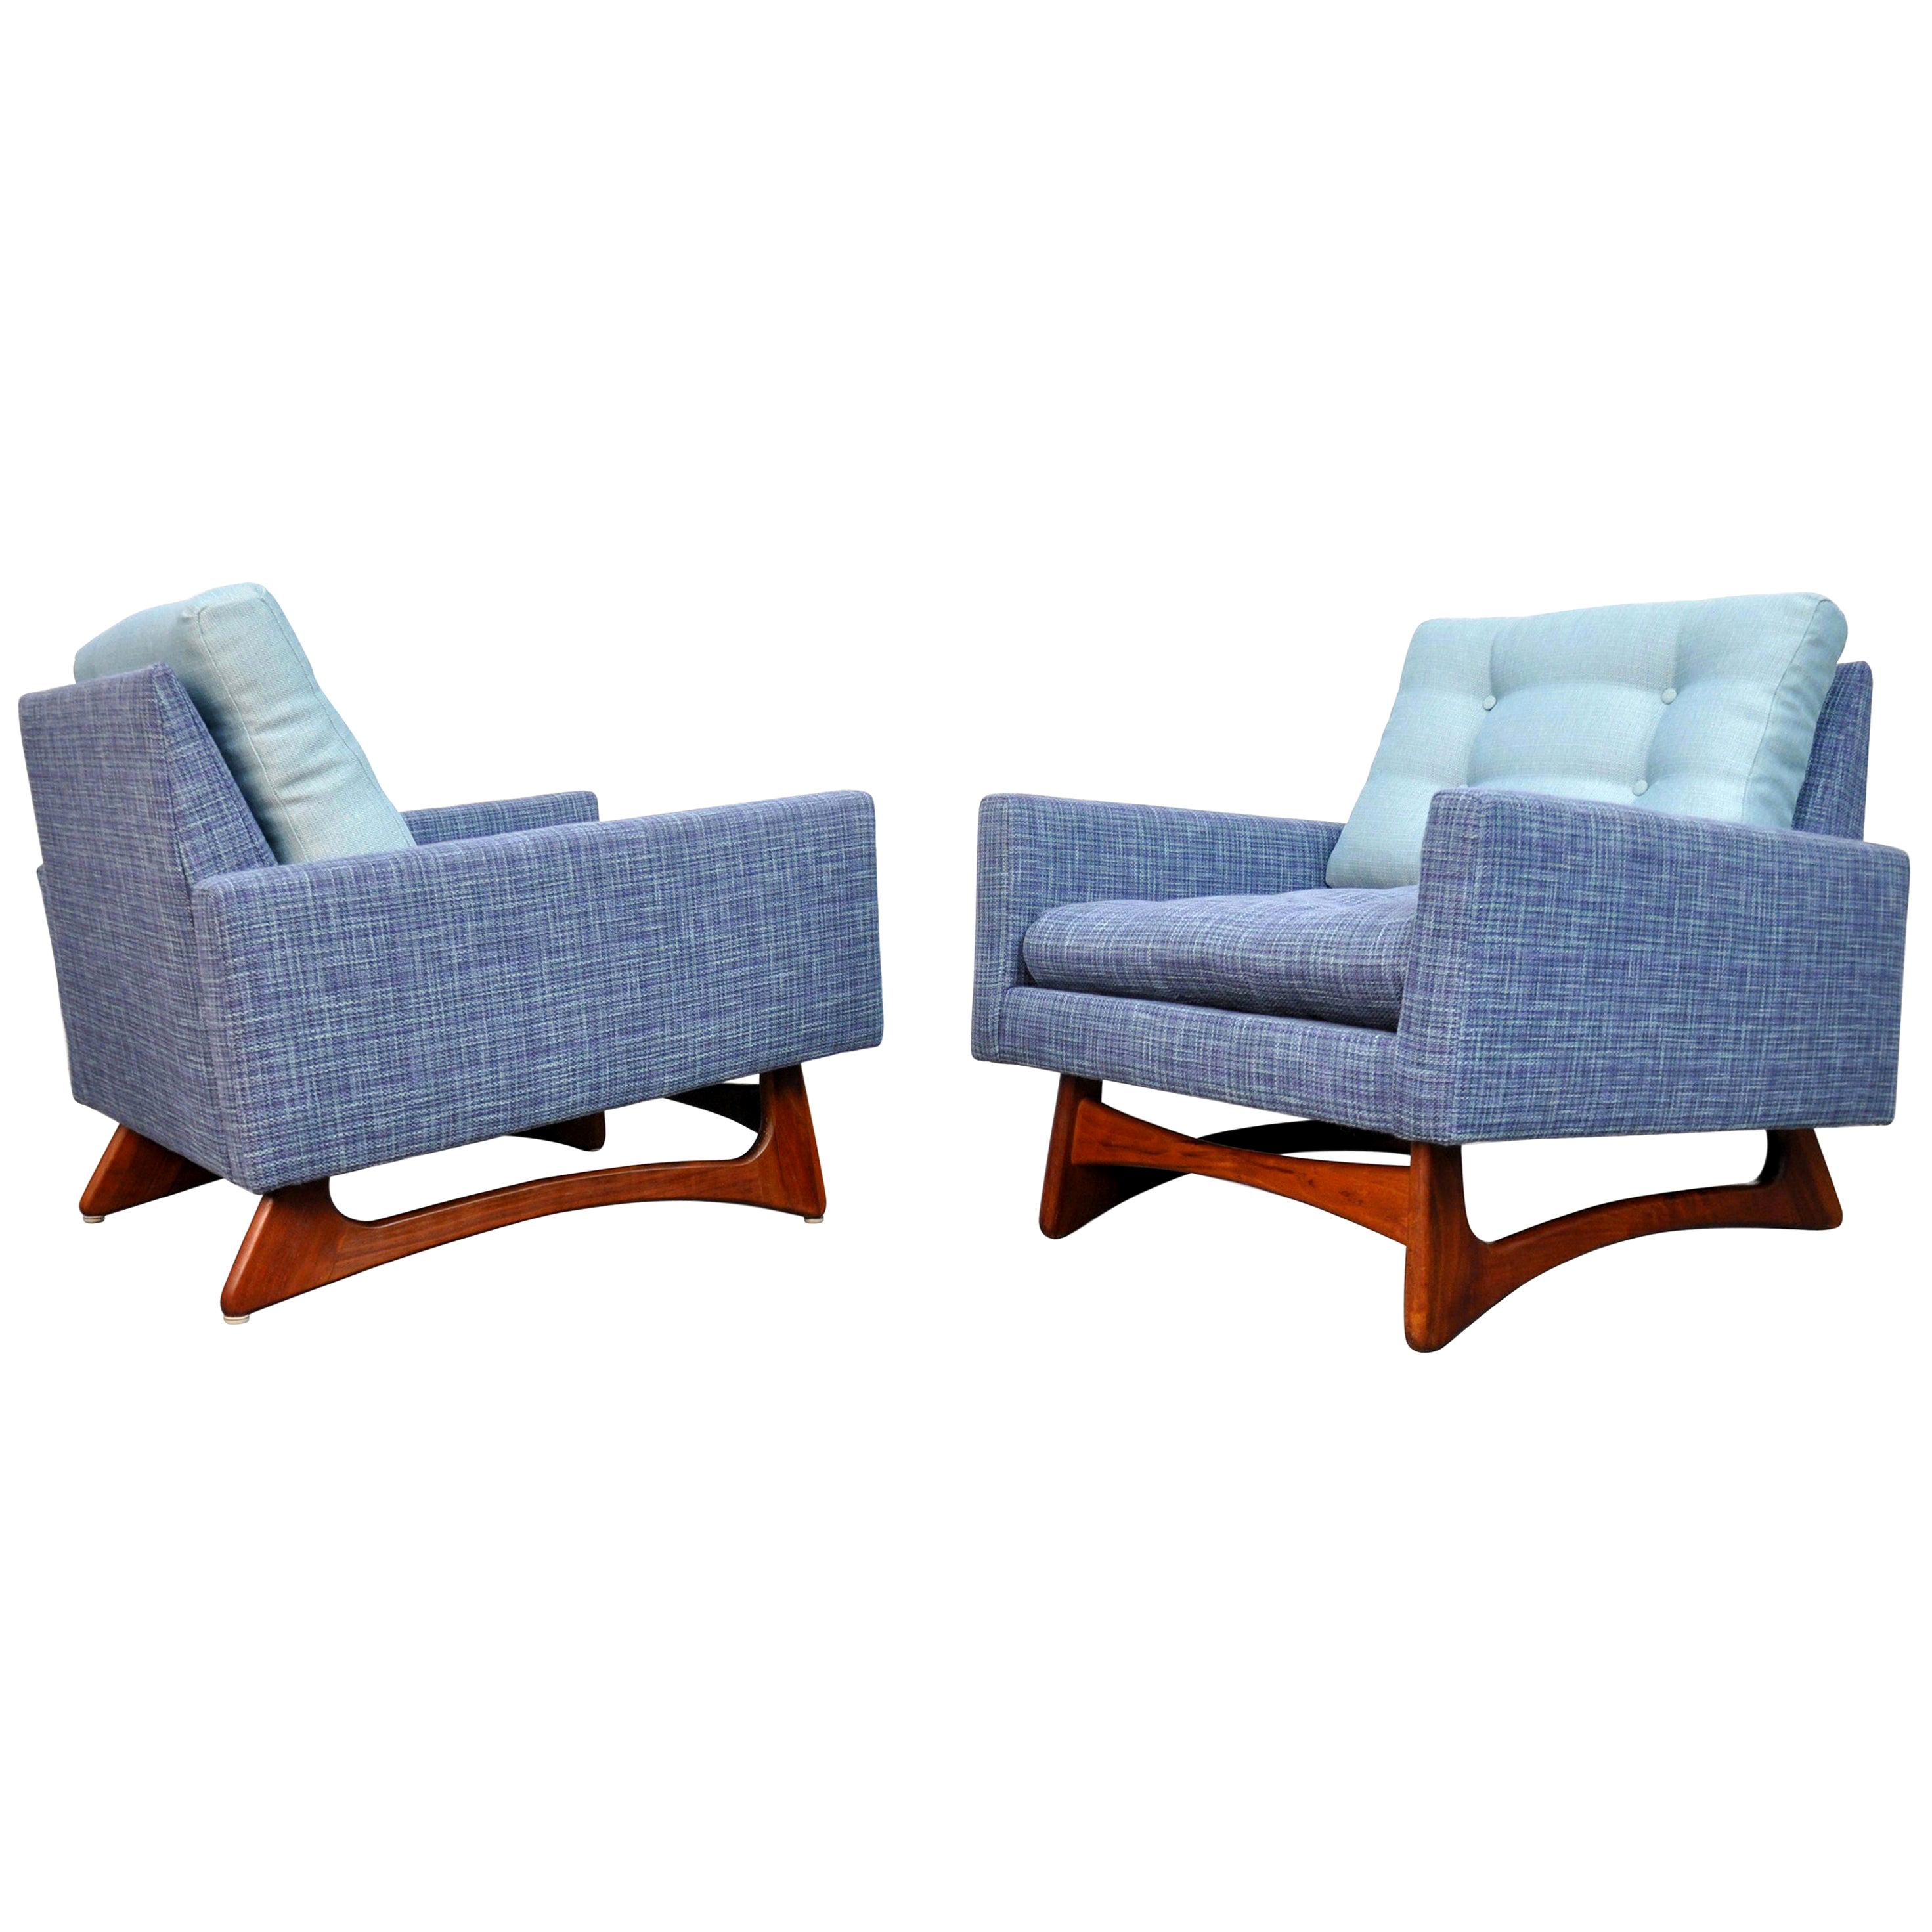 A gorgeous pair of blue Mid-Century Modern model 2406-C tufted club chairs featuring a beautifully grained, sculpted solid walnut frame, a quintessential characteristic of legendary American designer Adrian Pearsall. Each vintage armchair has been